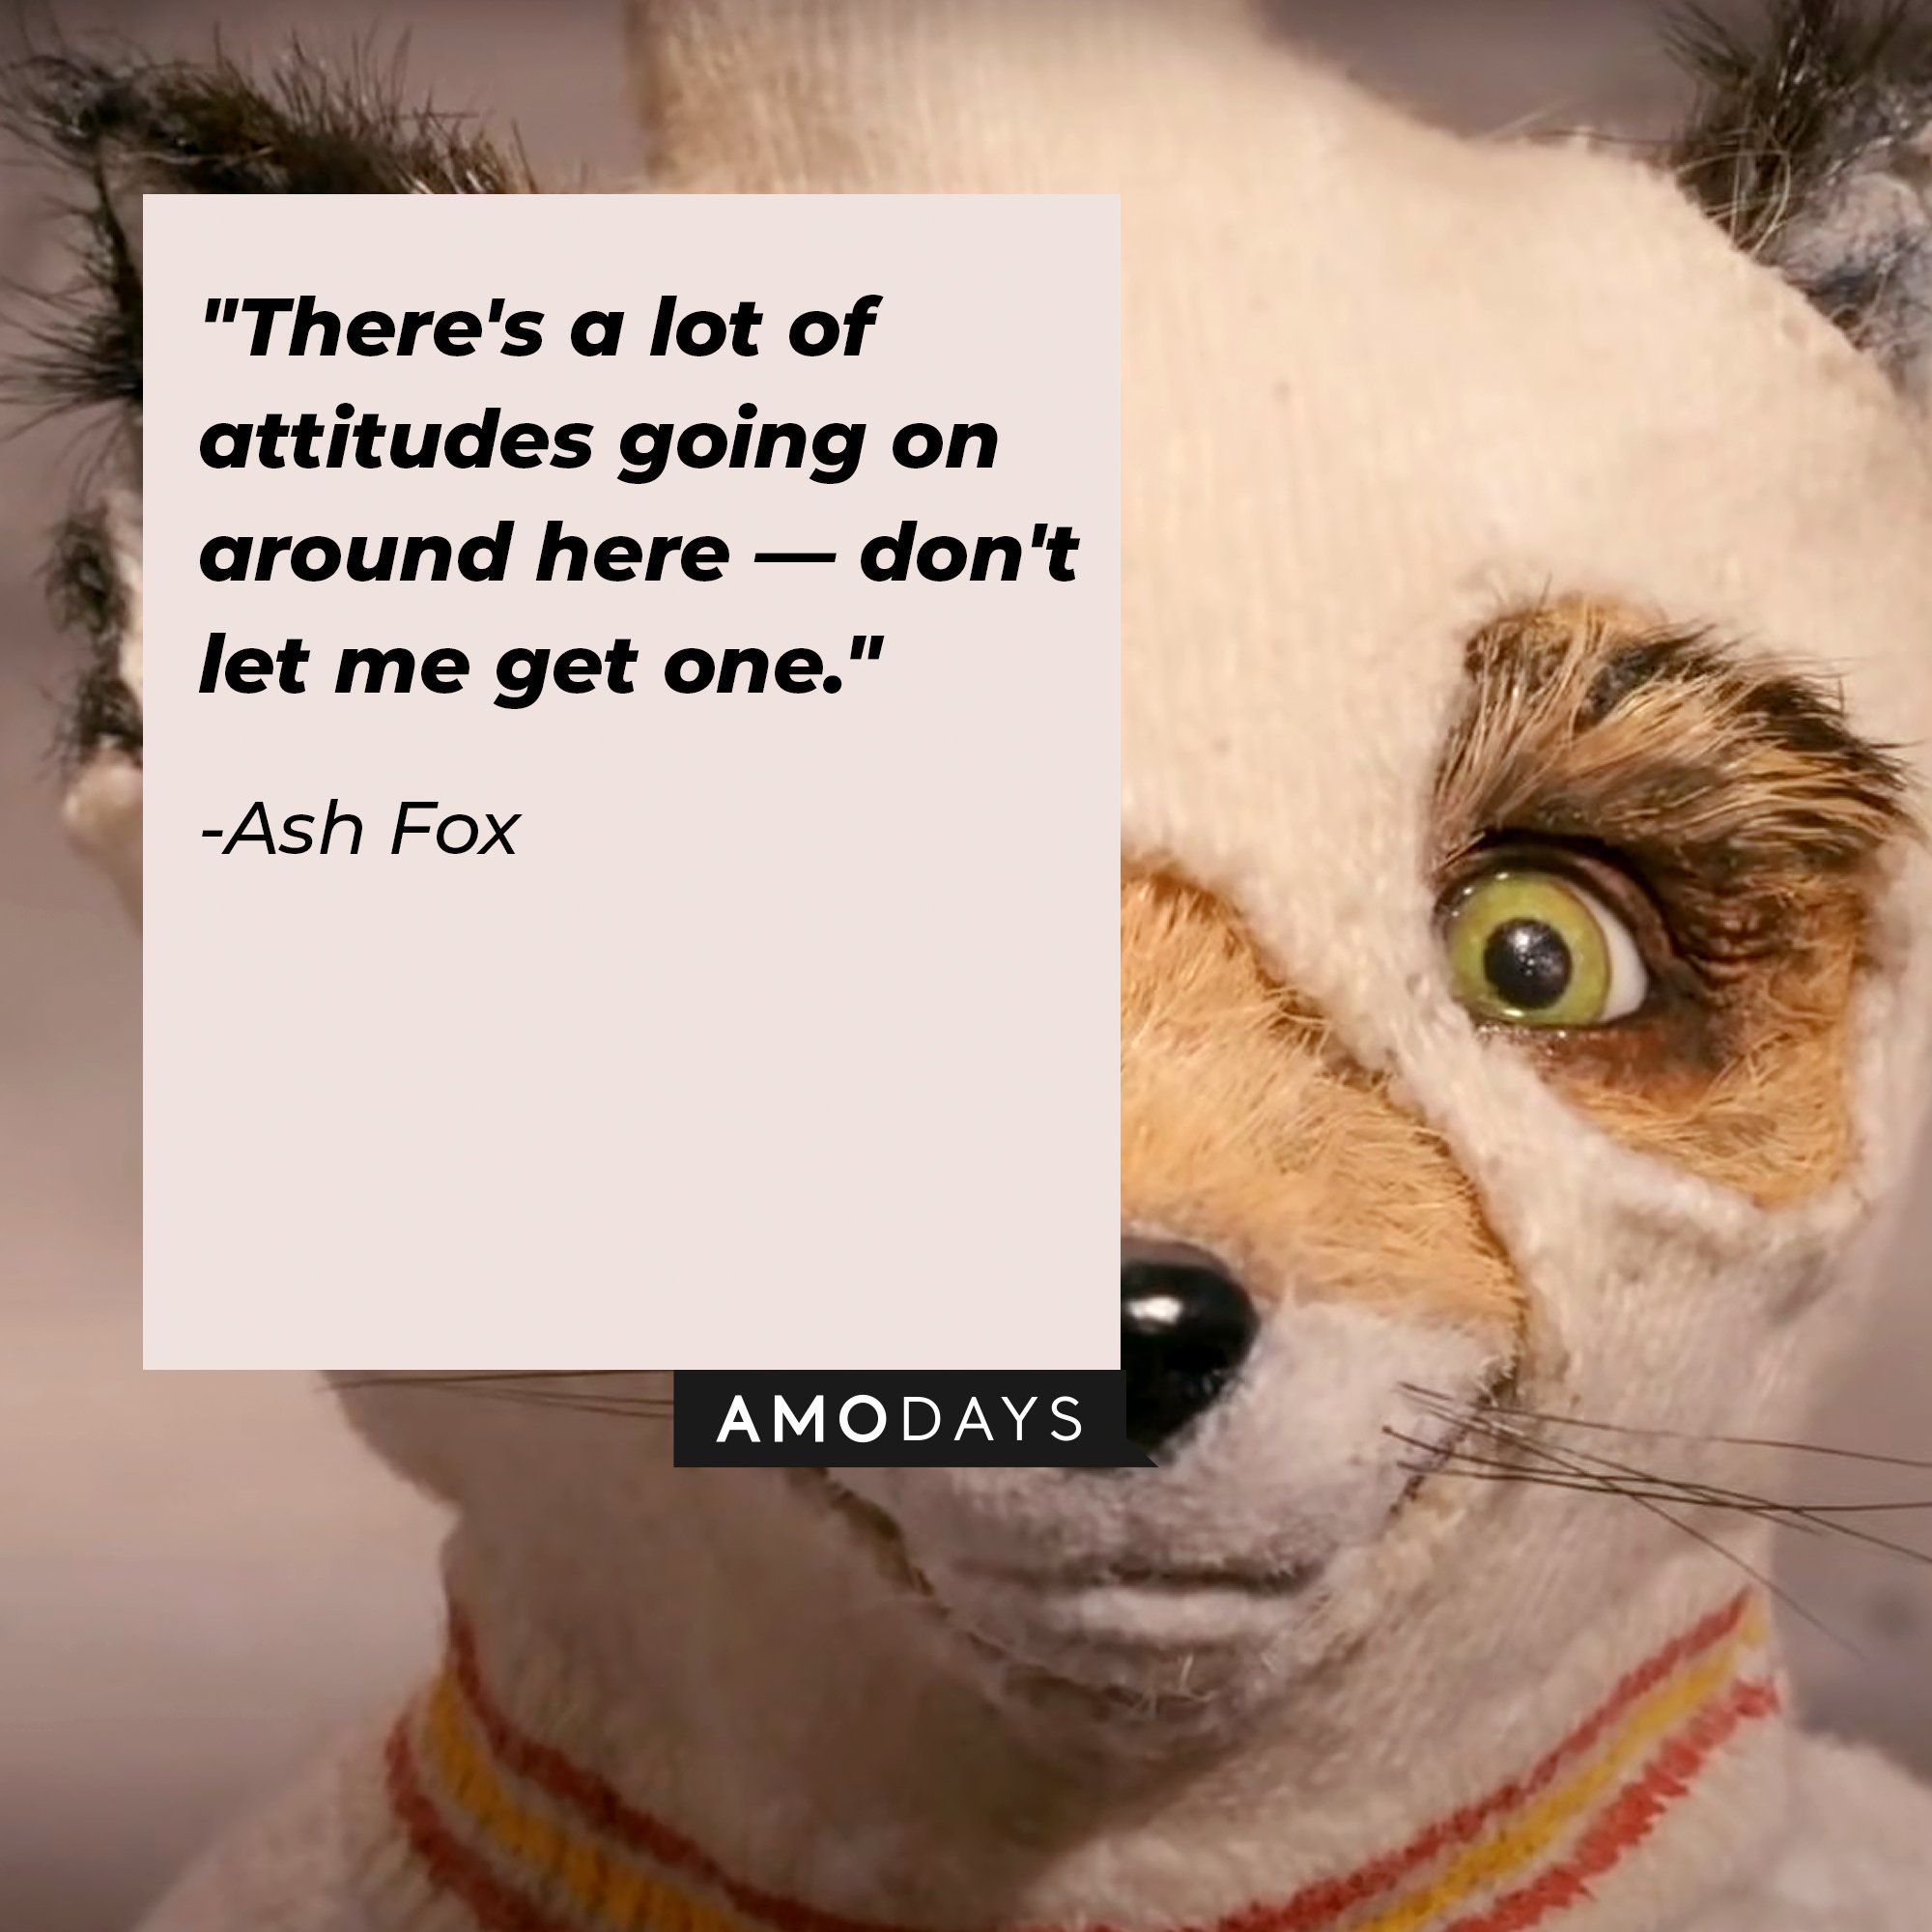 Ash Fox’s Quote: "There's a lot of attitudes going on around here — don't let me get one." | Image: AmoDays